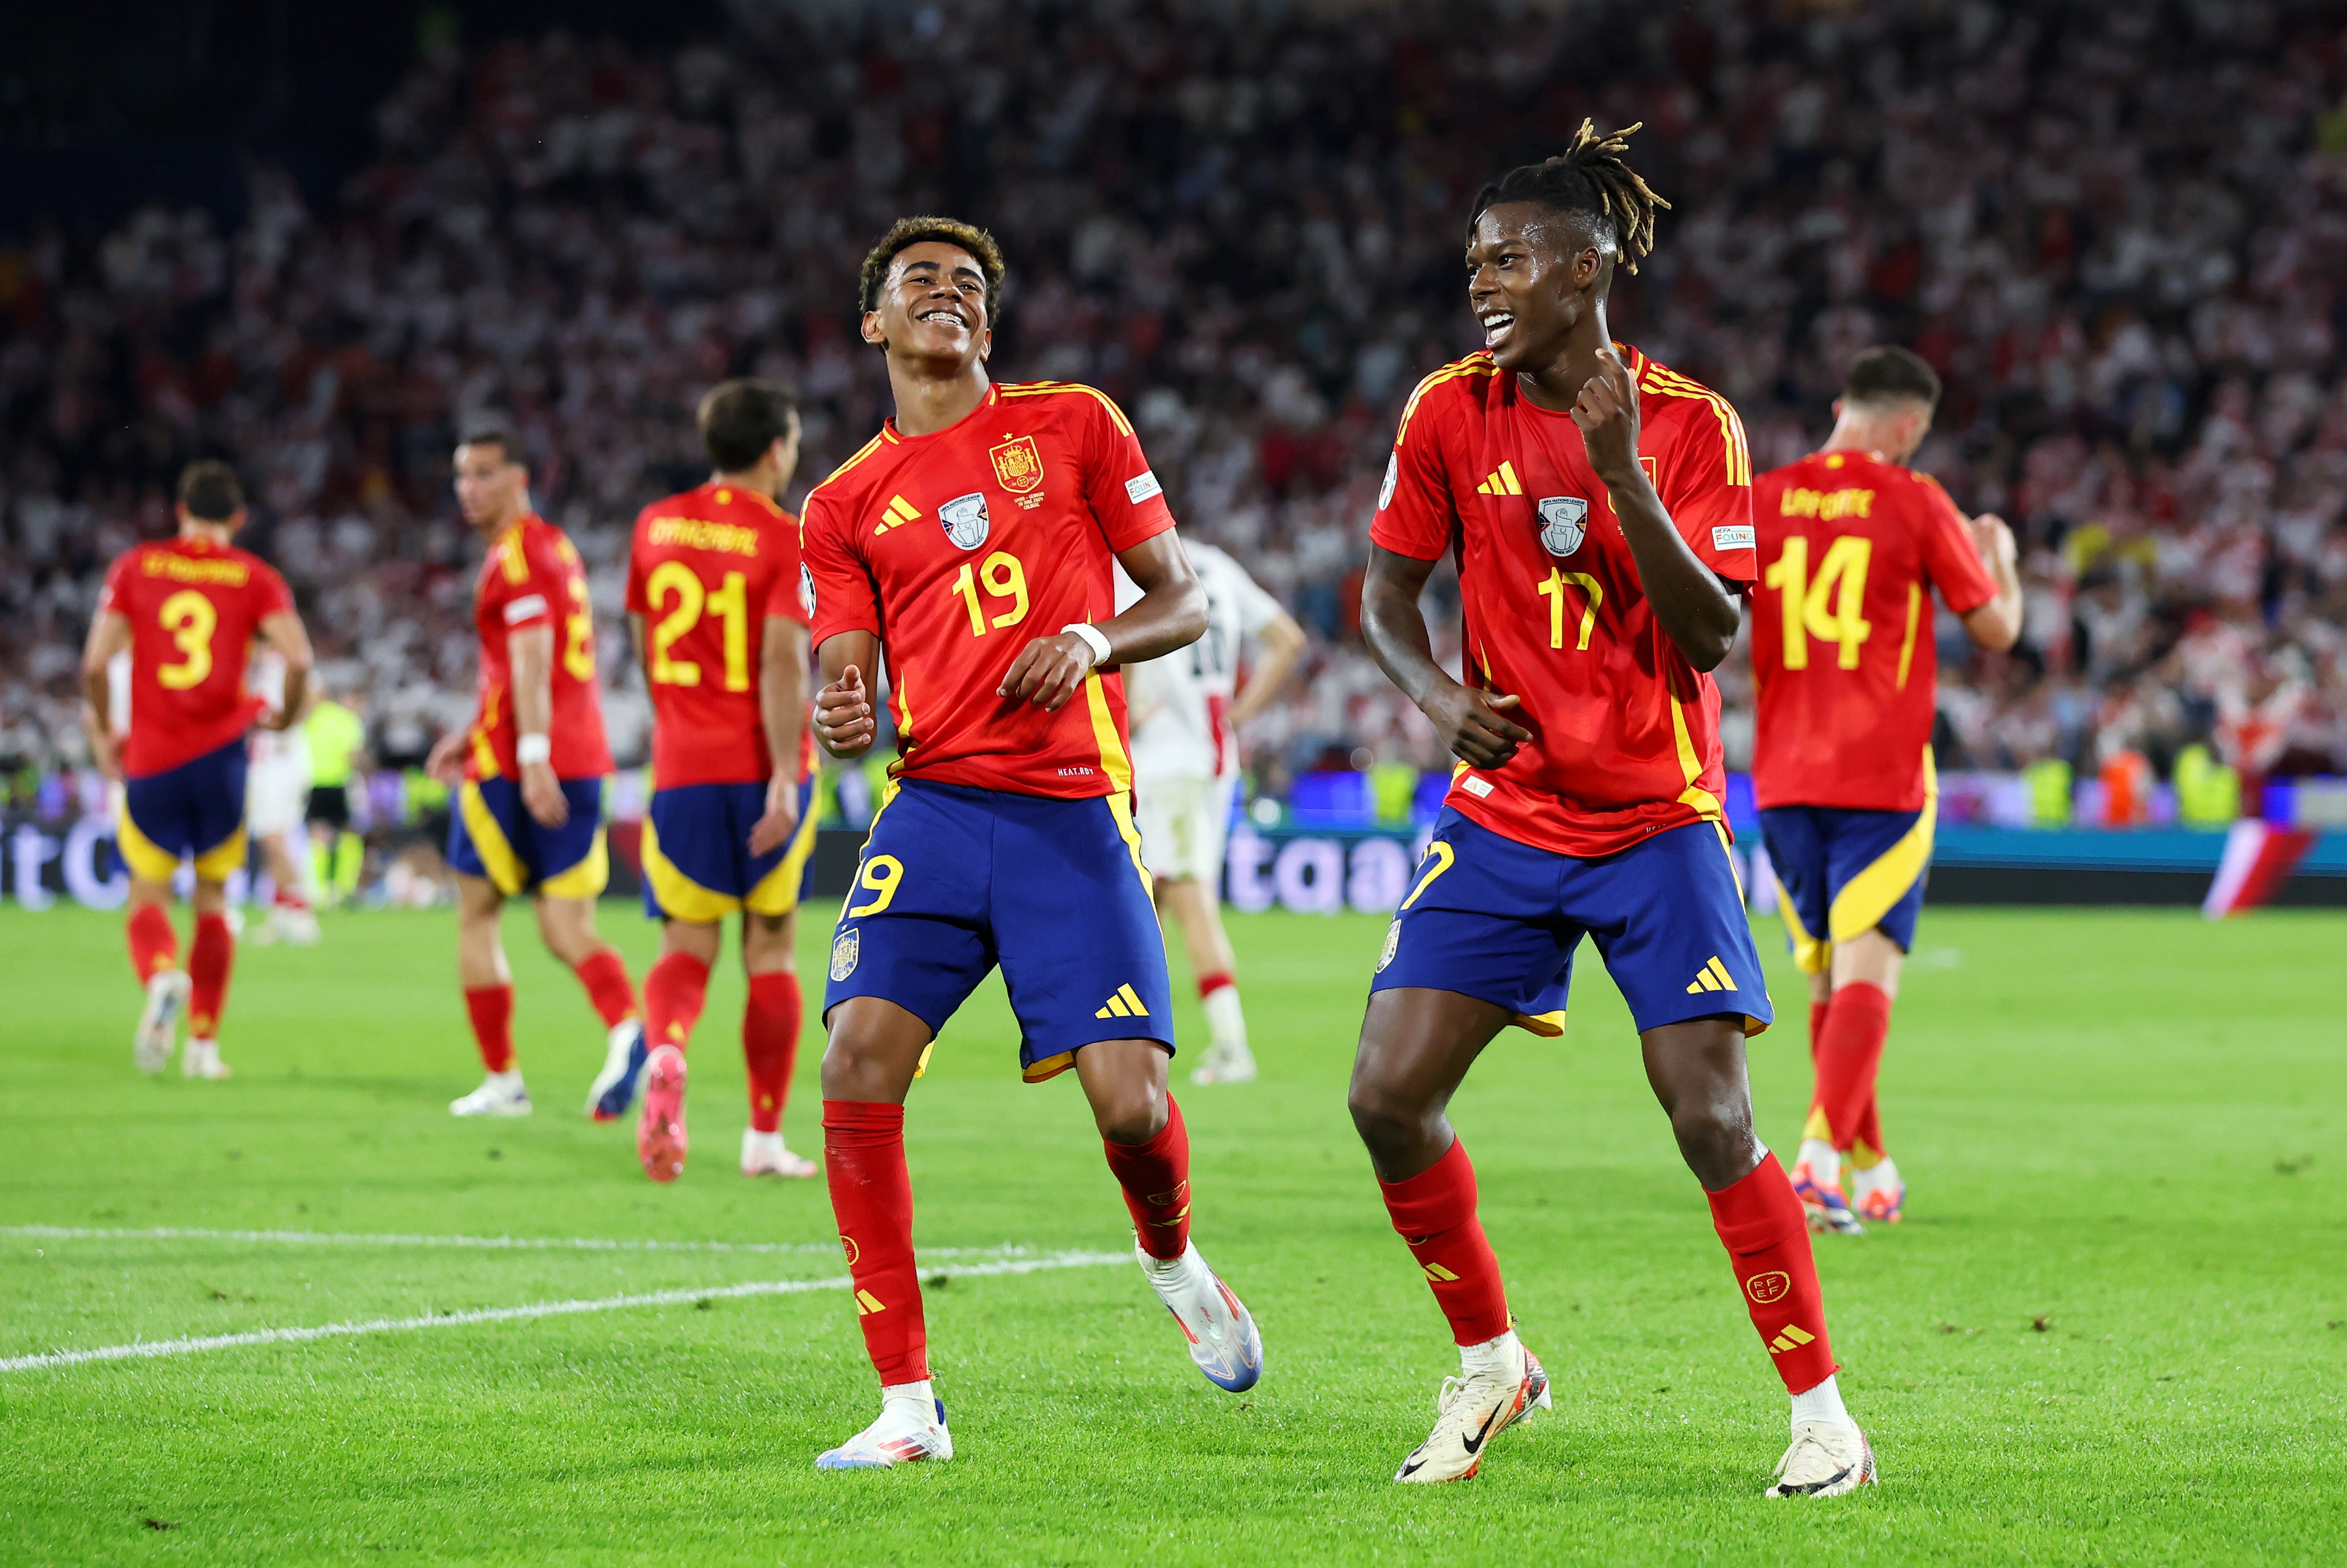 Serious moves: the two wingers have caused trouble for Spain’s opponents so far